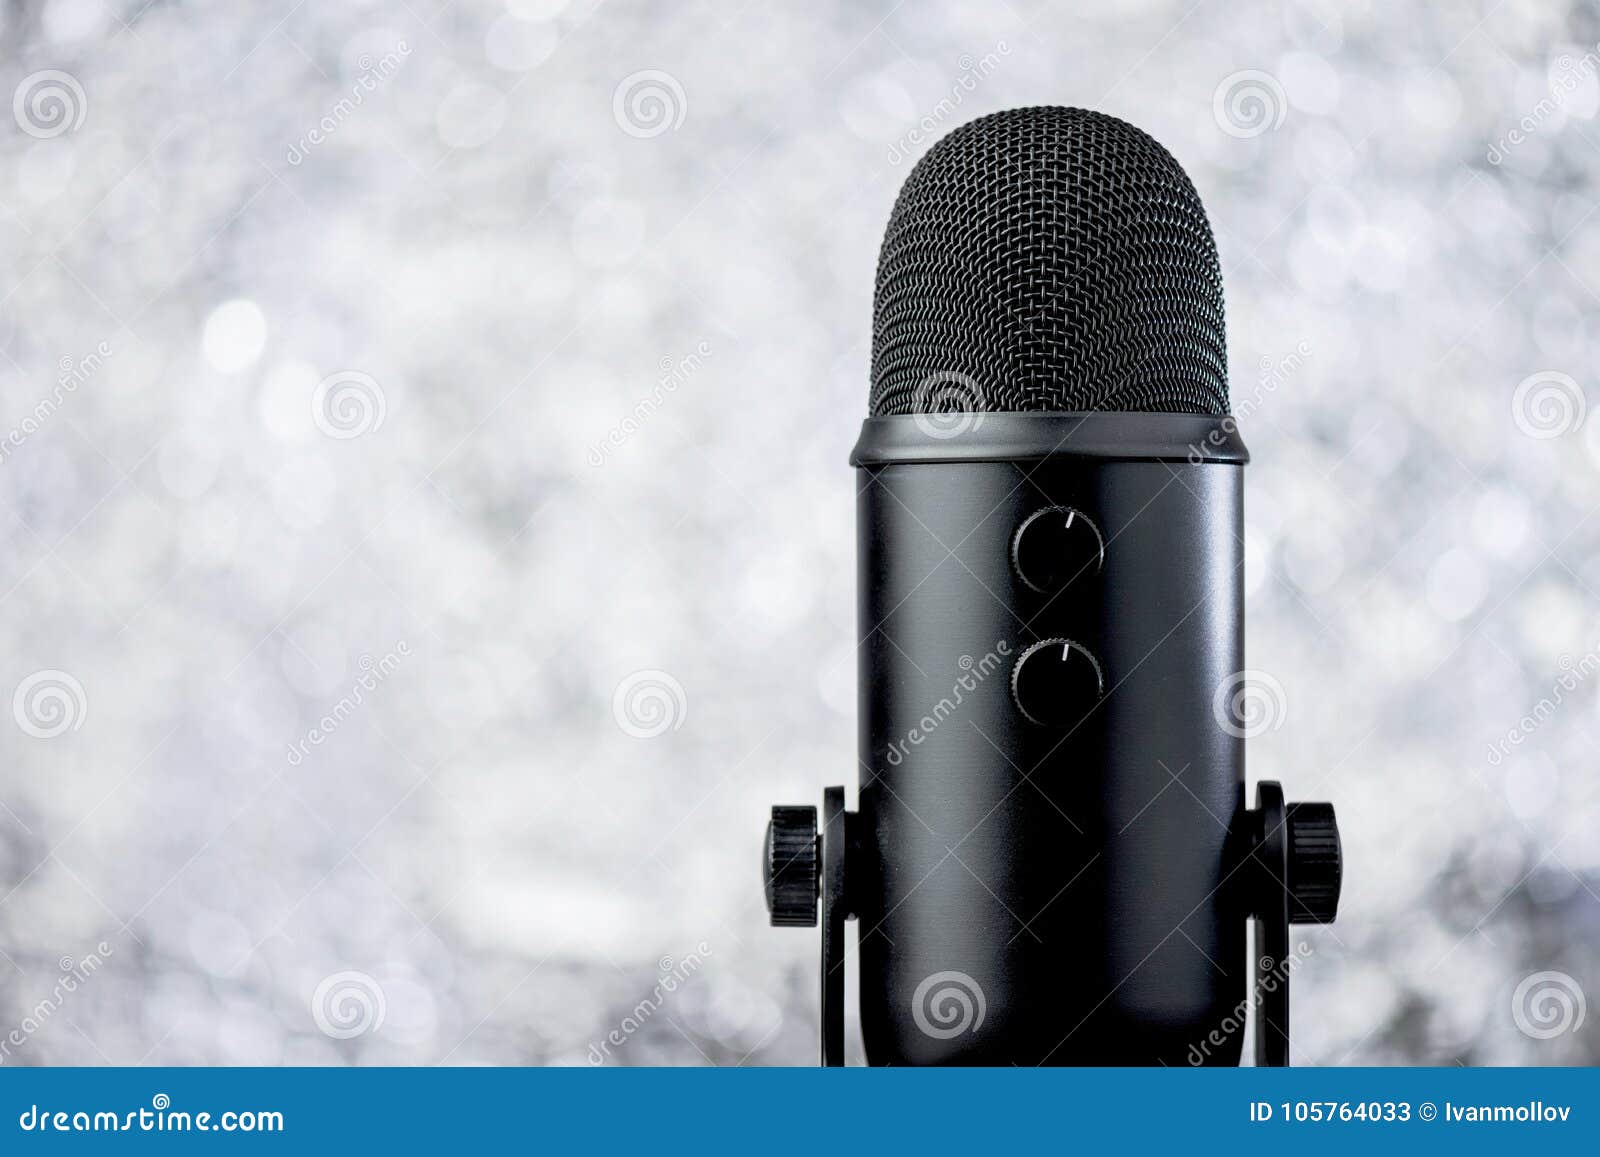 black profesional microphone on blurred background